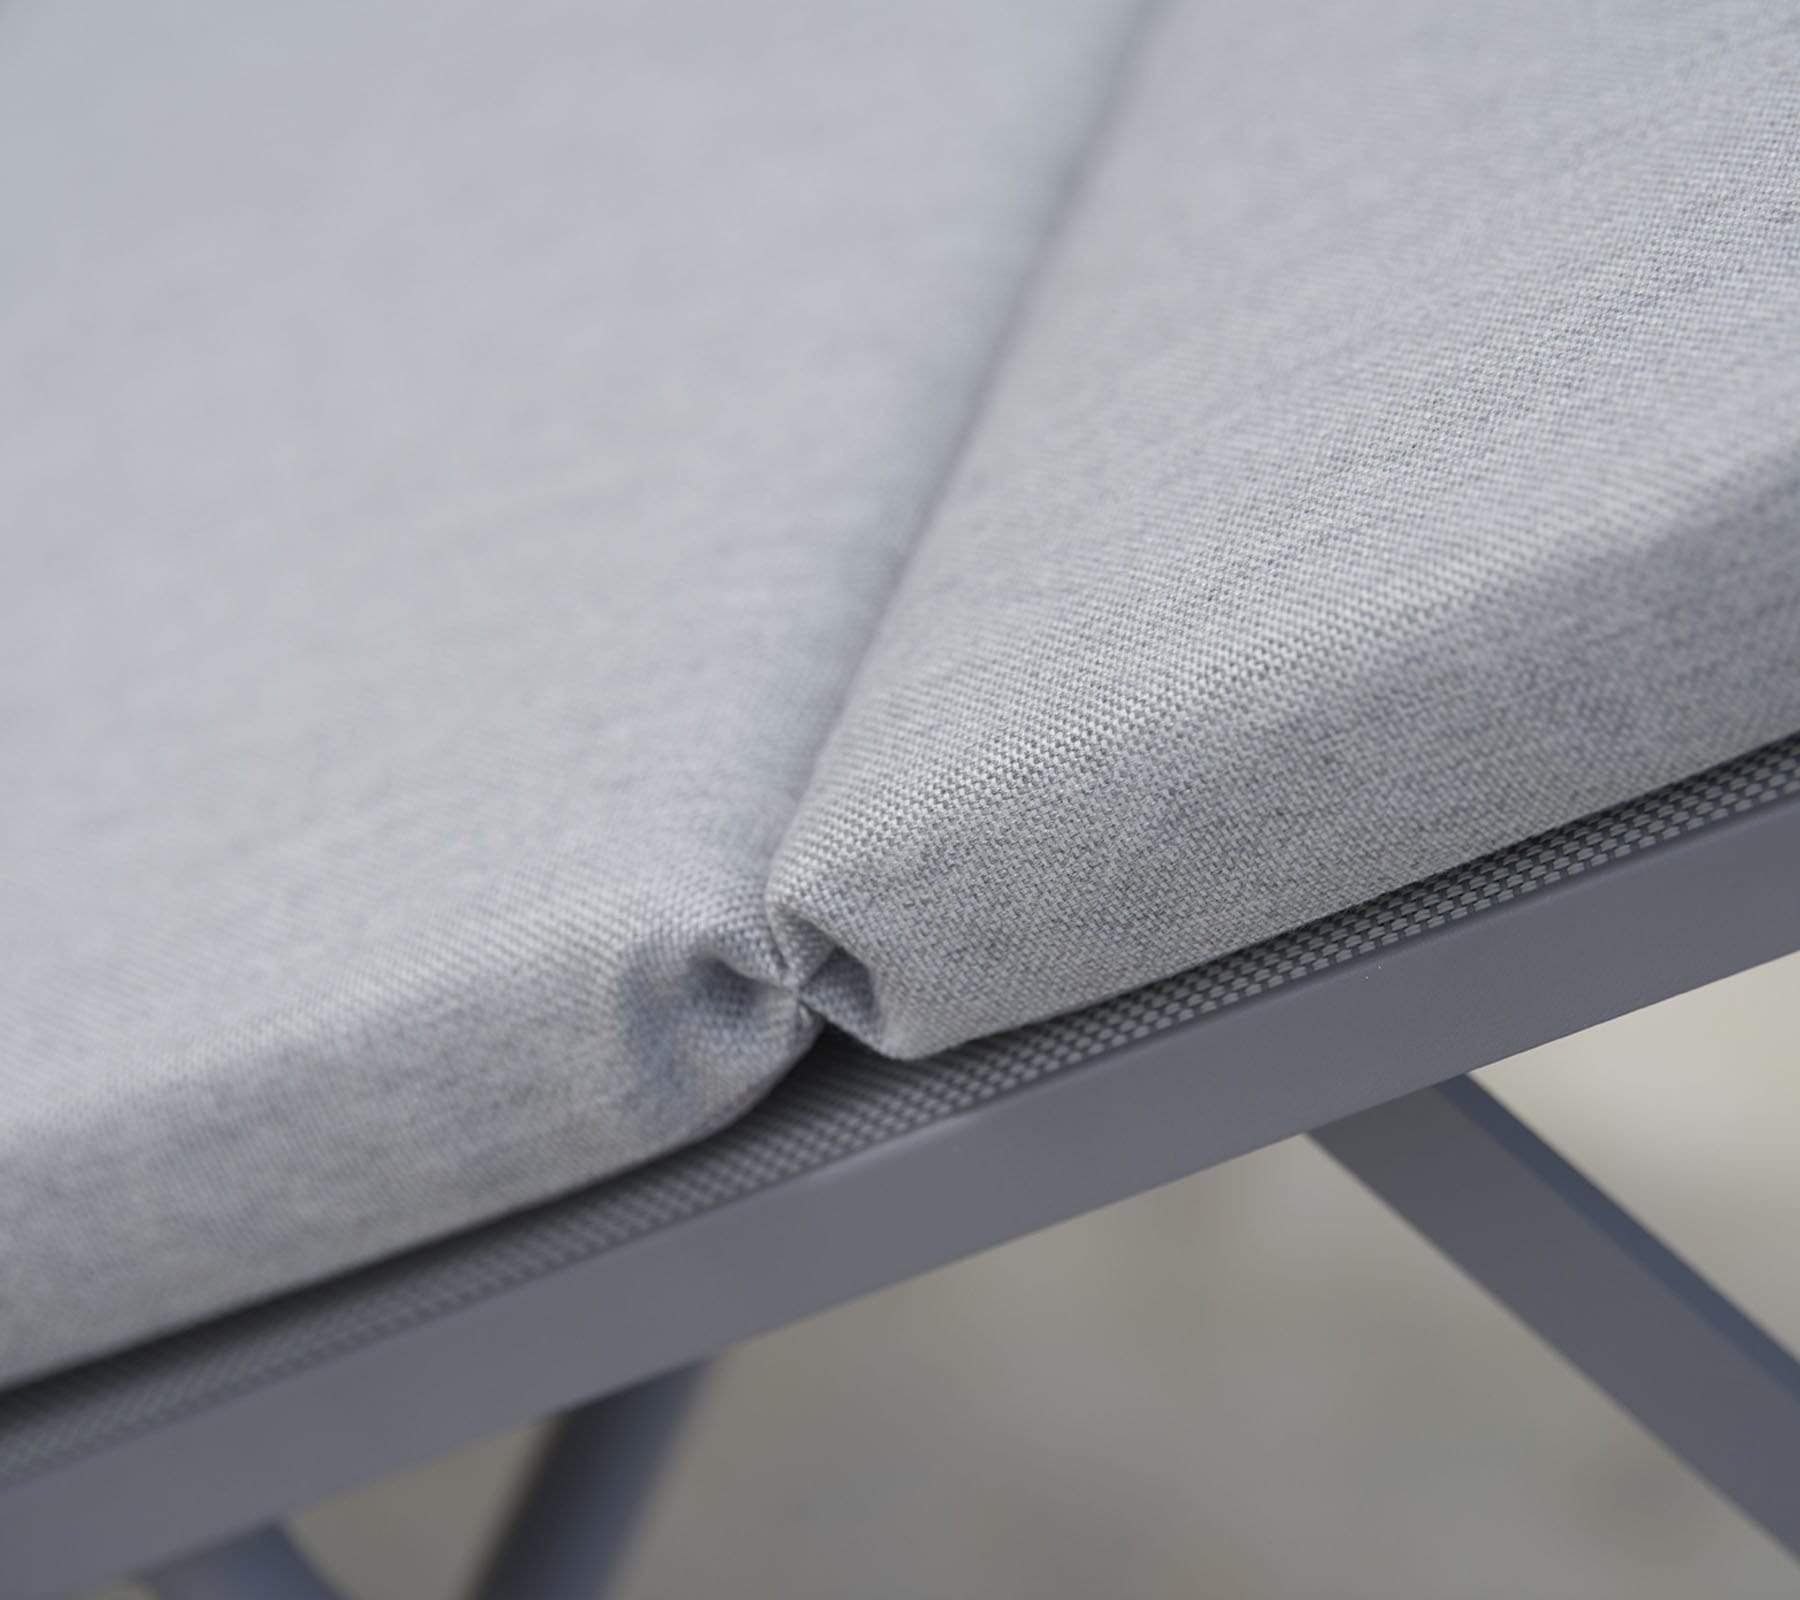   Boxhill's Relax light grey outdoor chaise lounge with light grey cushion close up view